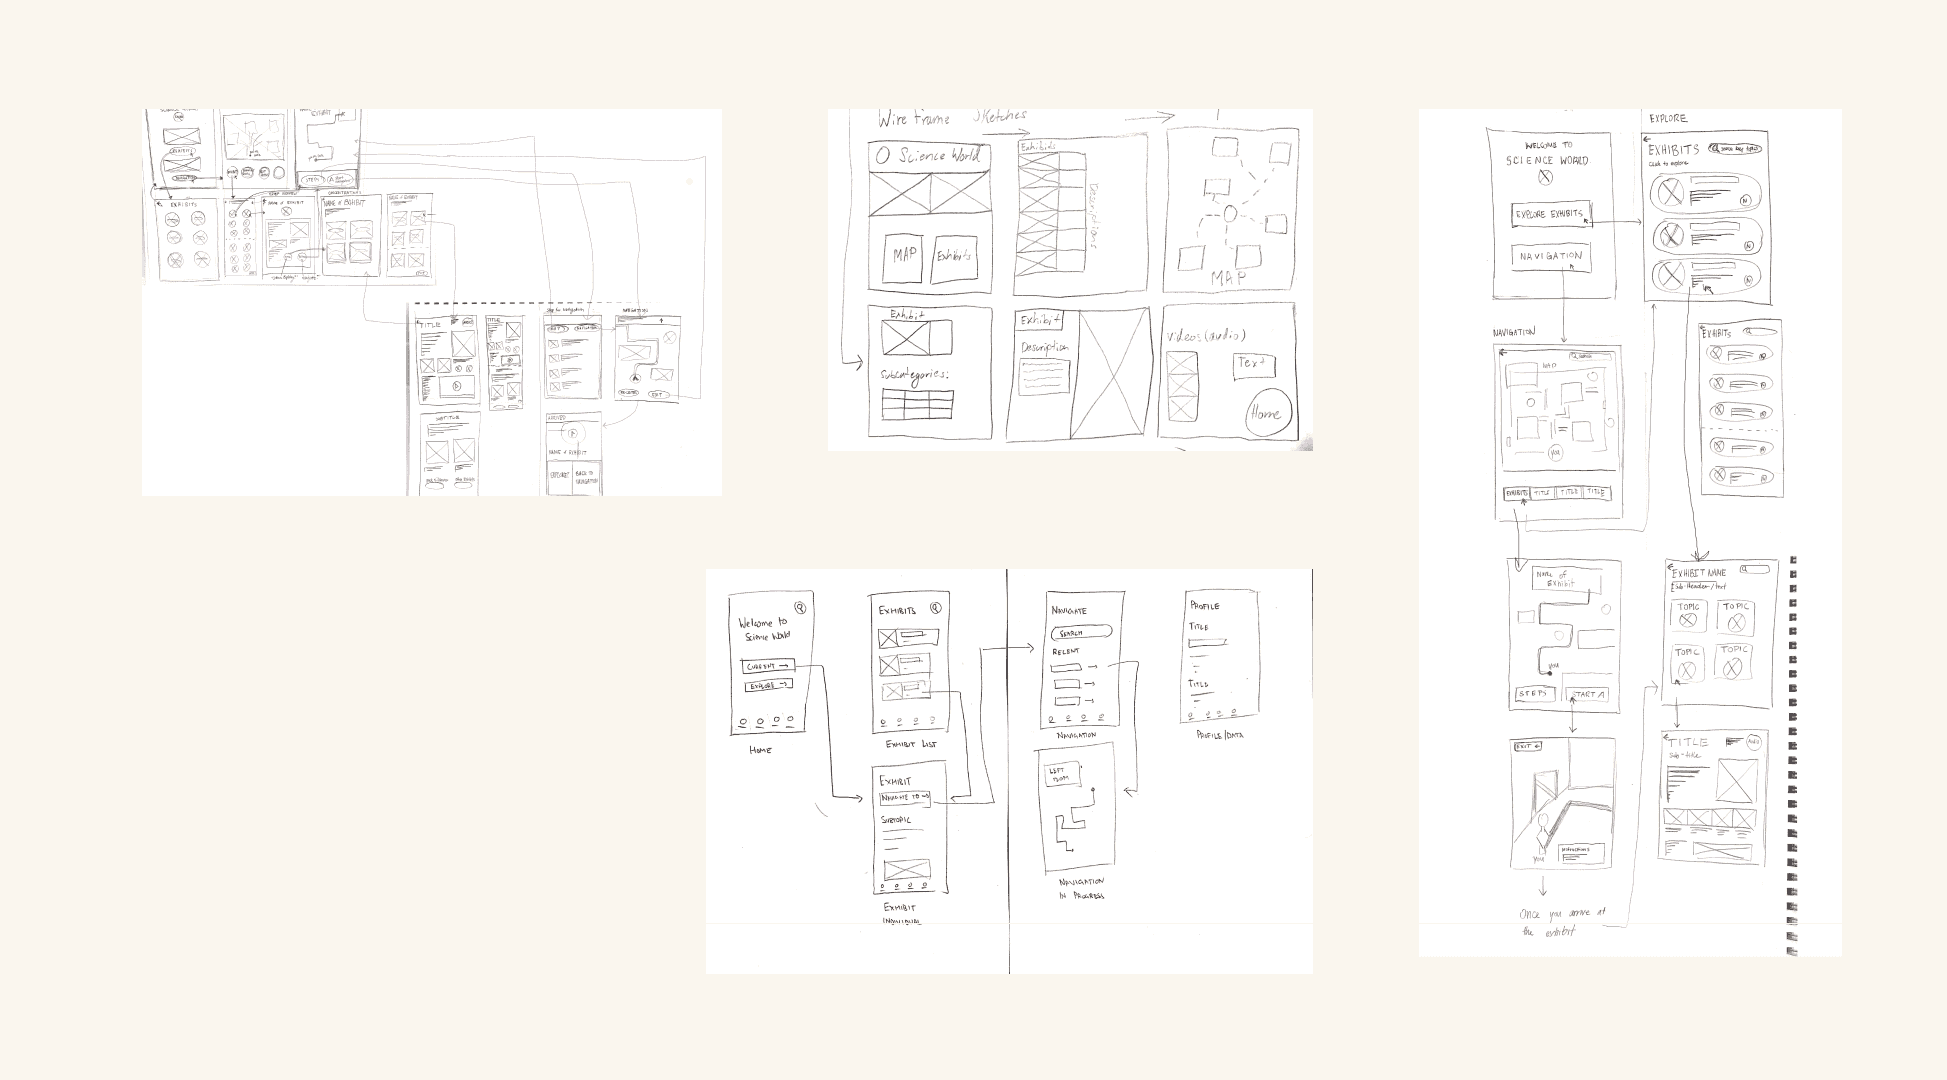 Sketches for the mobile app